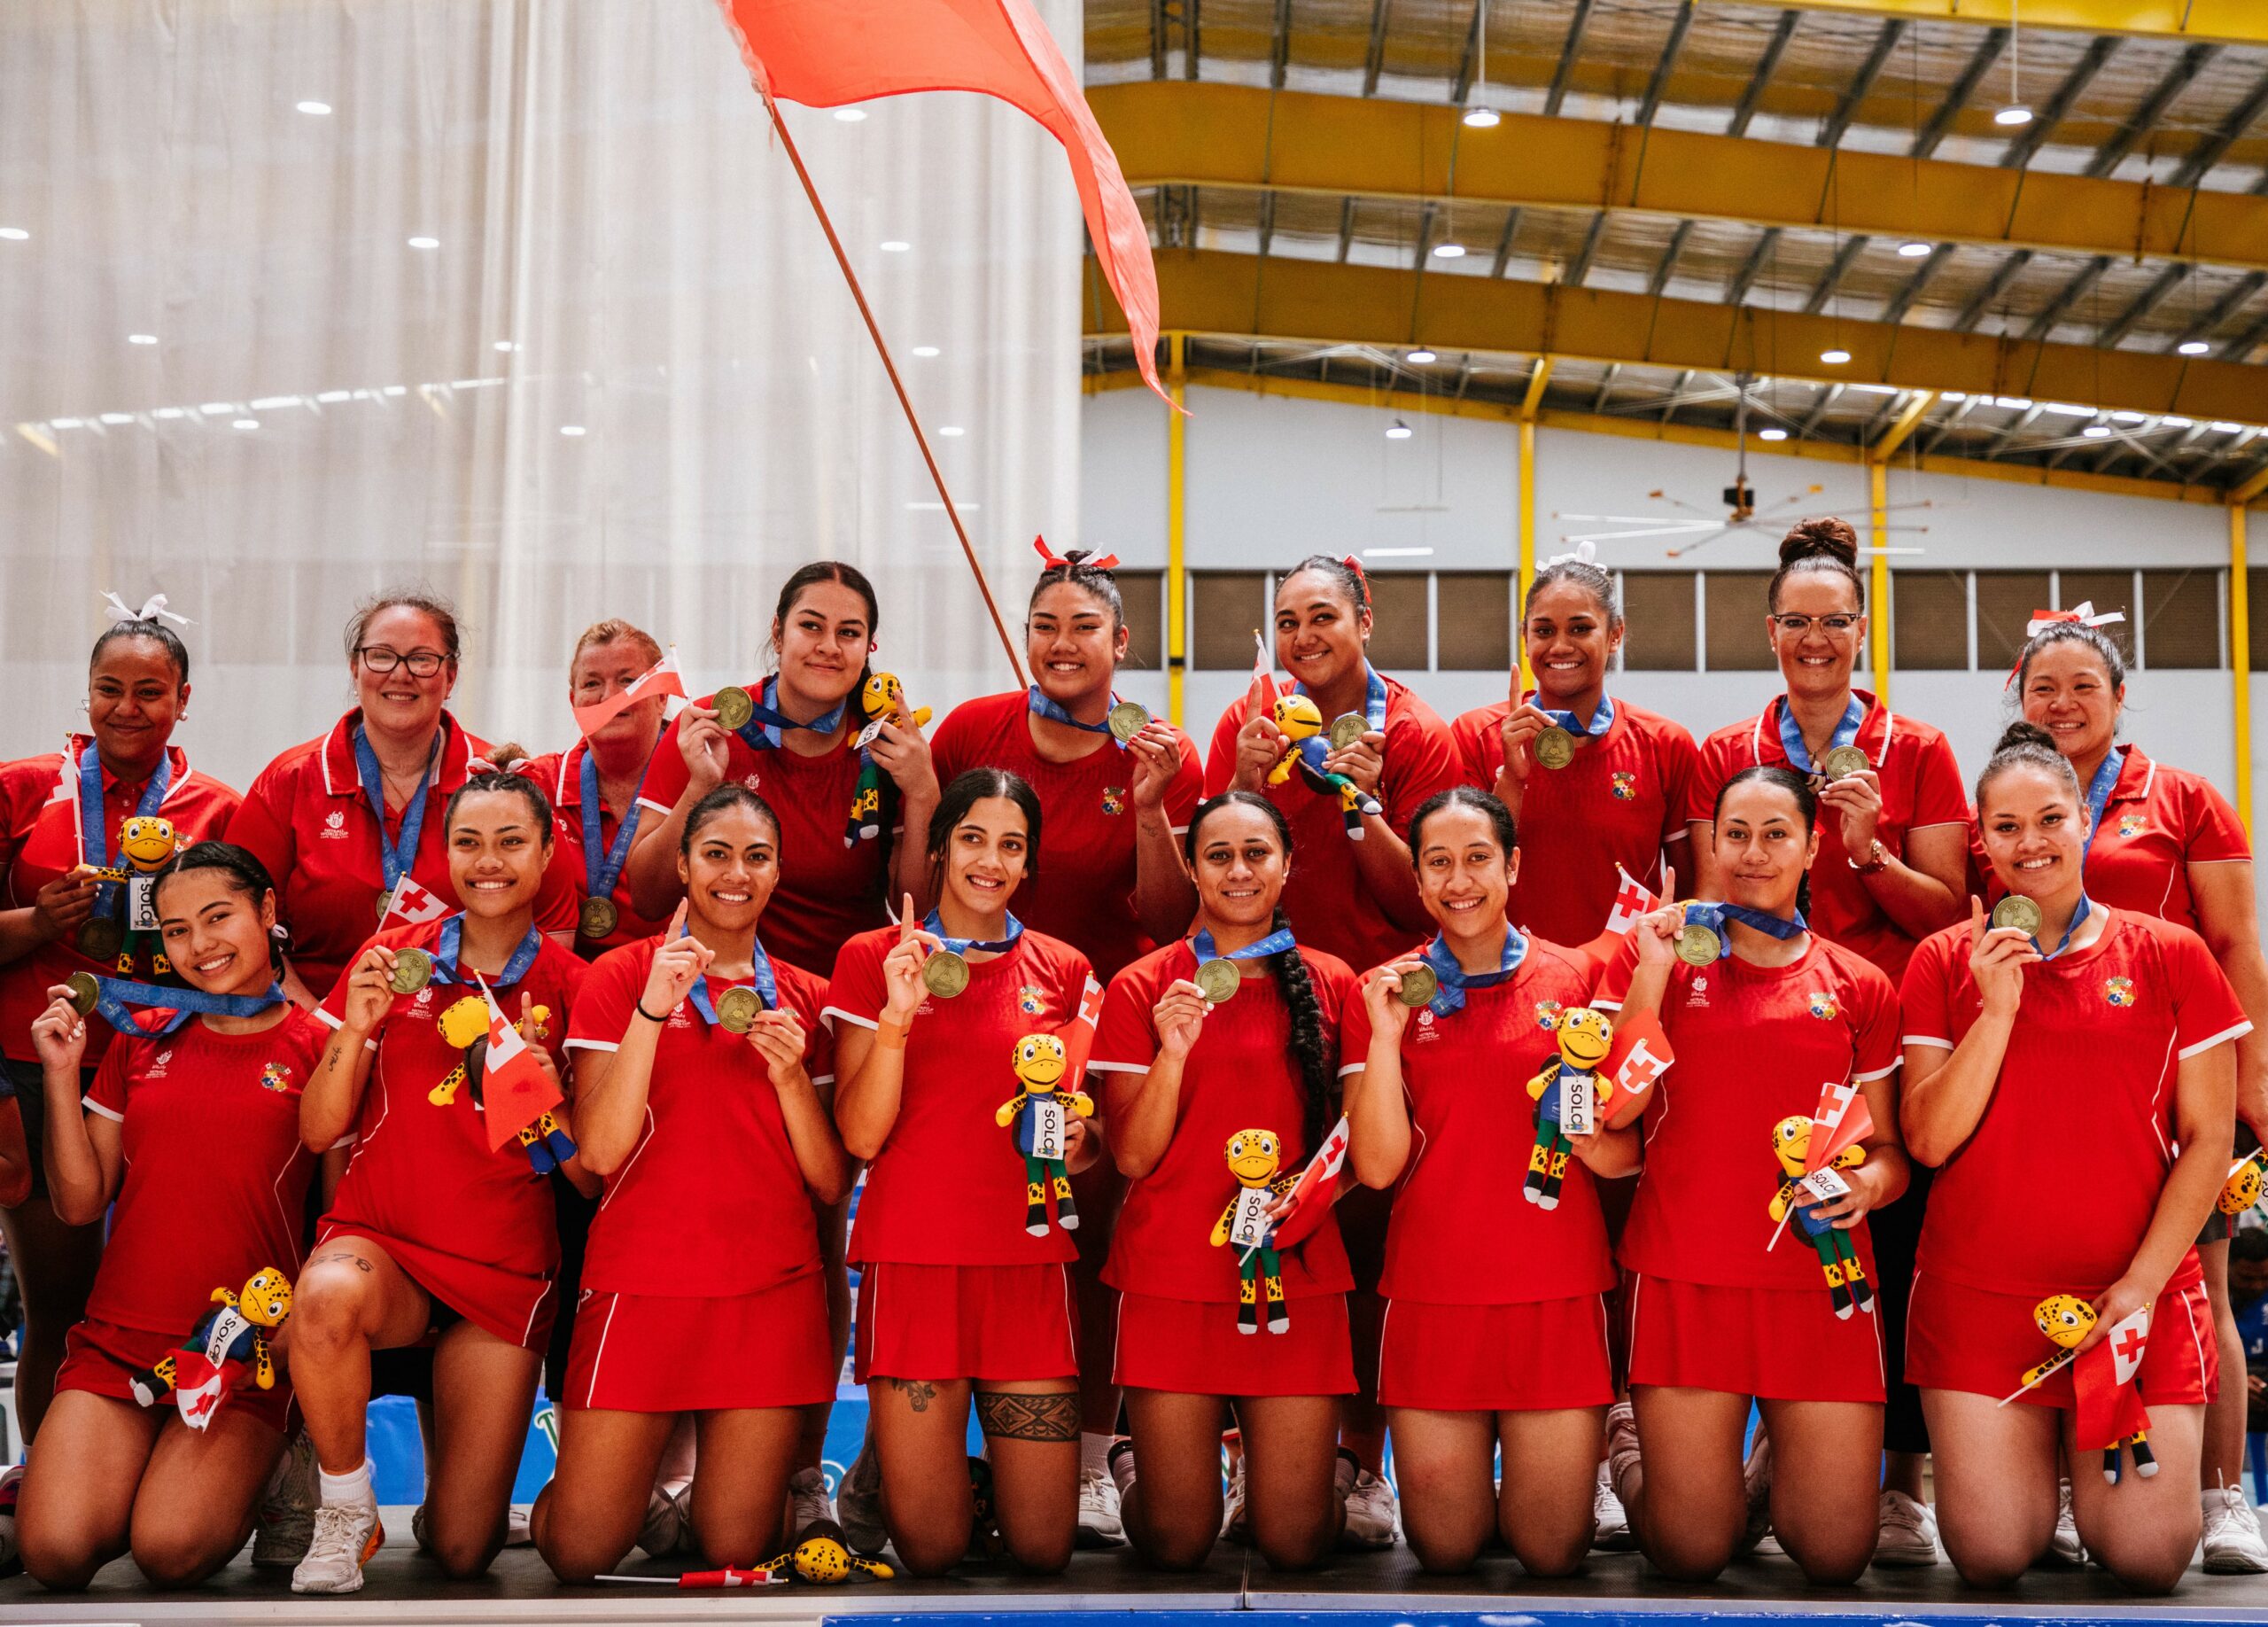 A netball team with gold medals